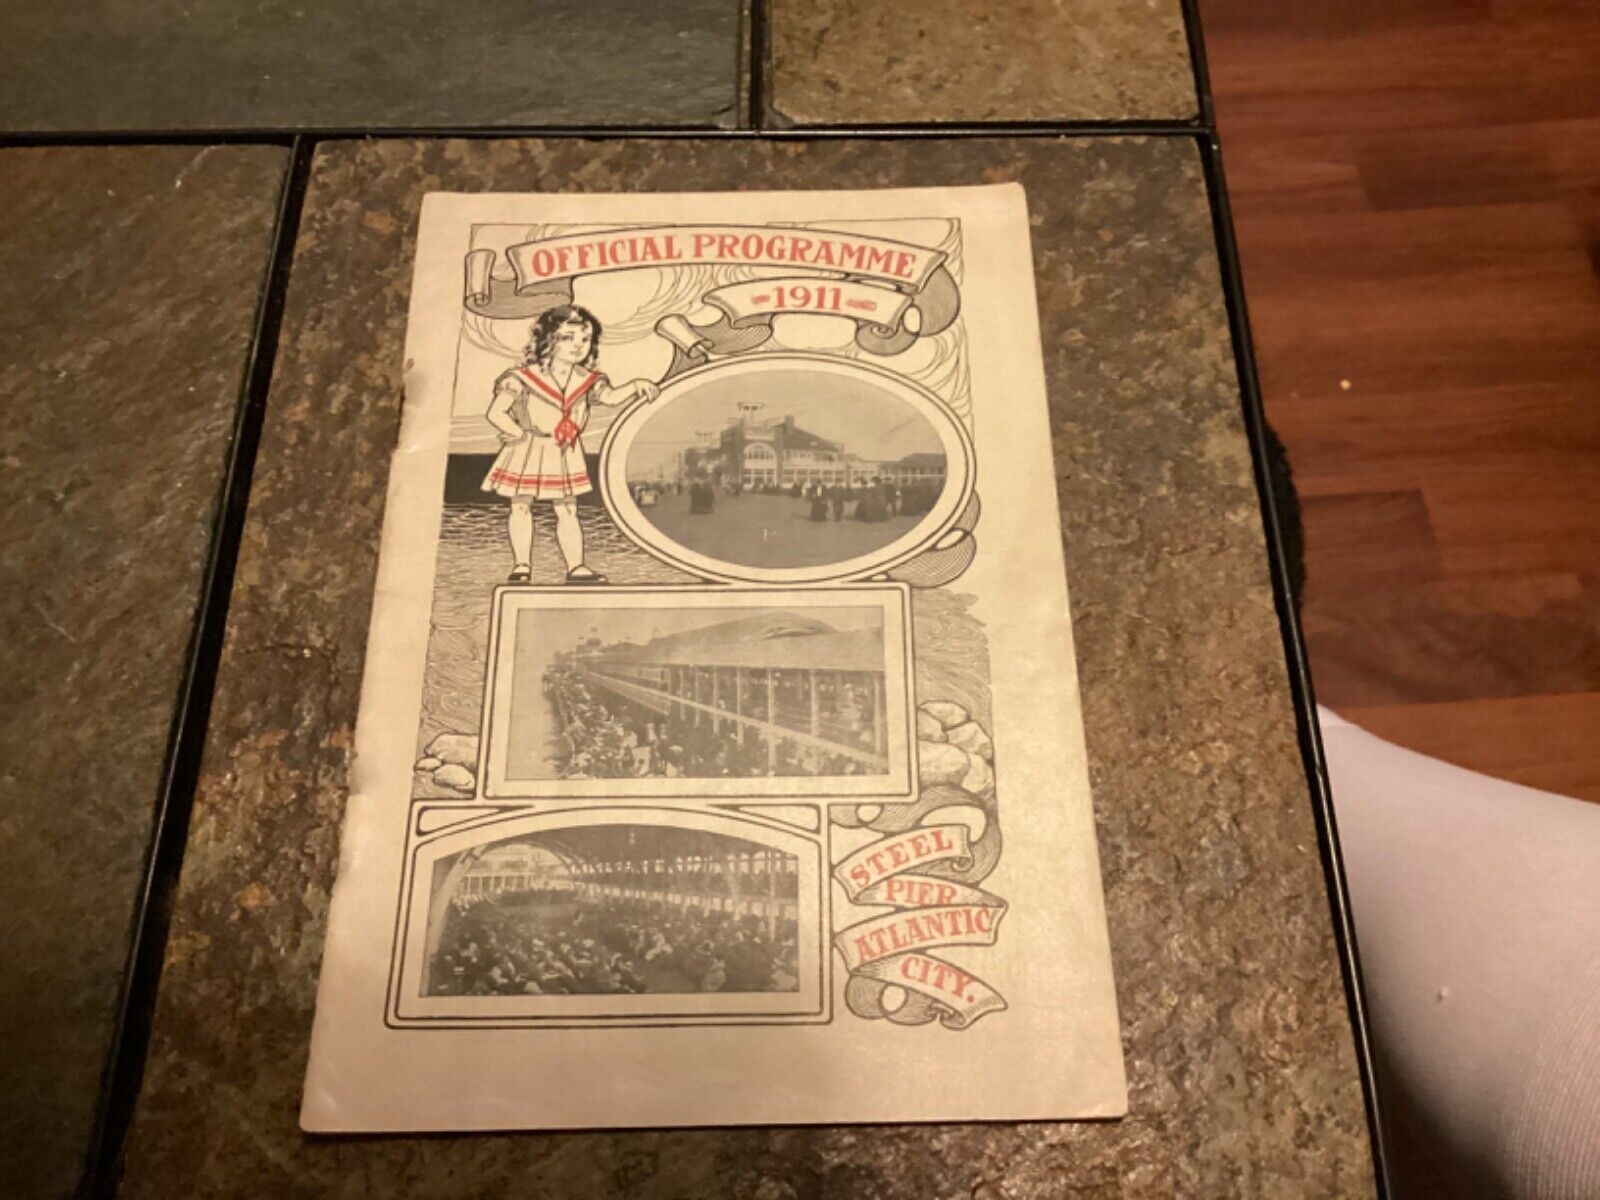 August 1911 Steel Pier, Atlantic City, Official Daily Programme